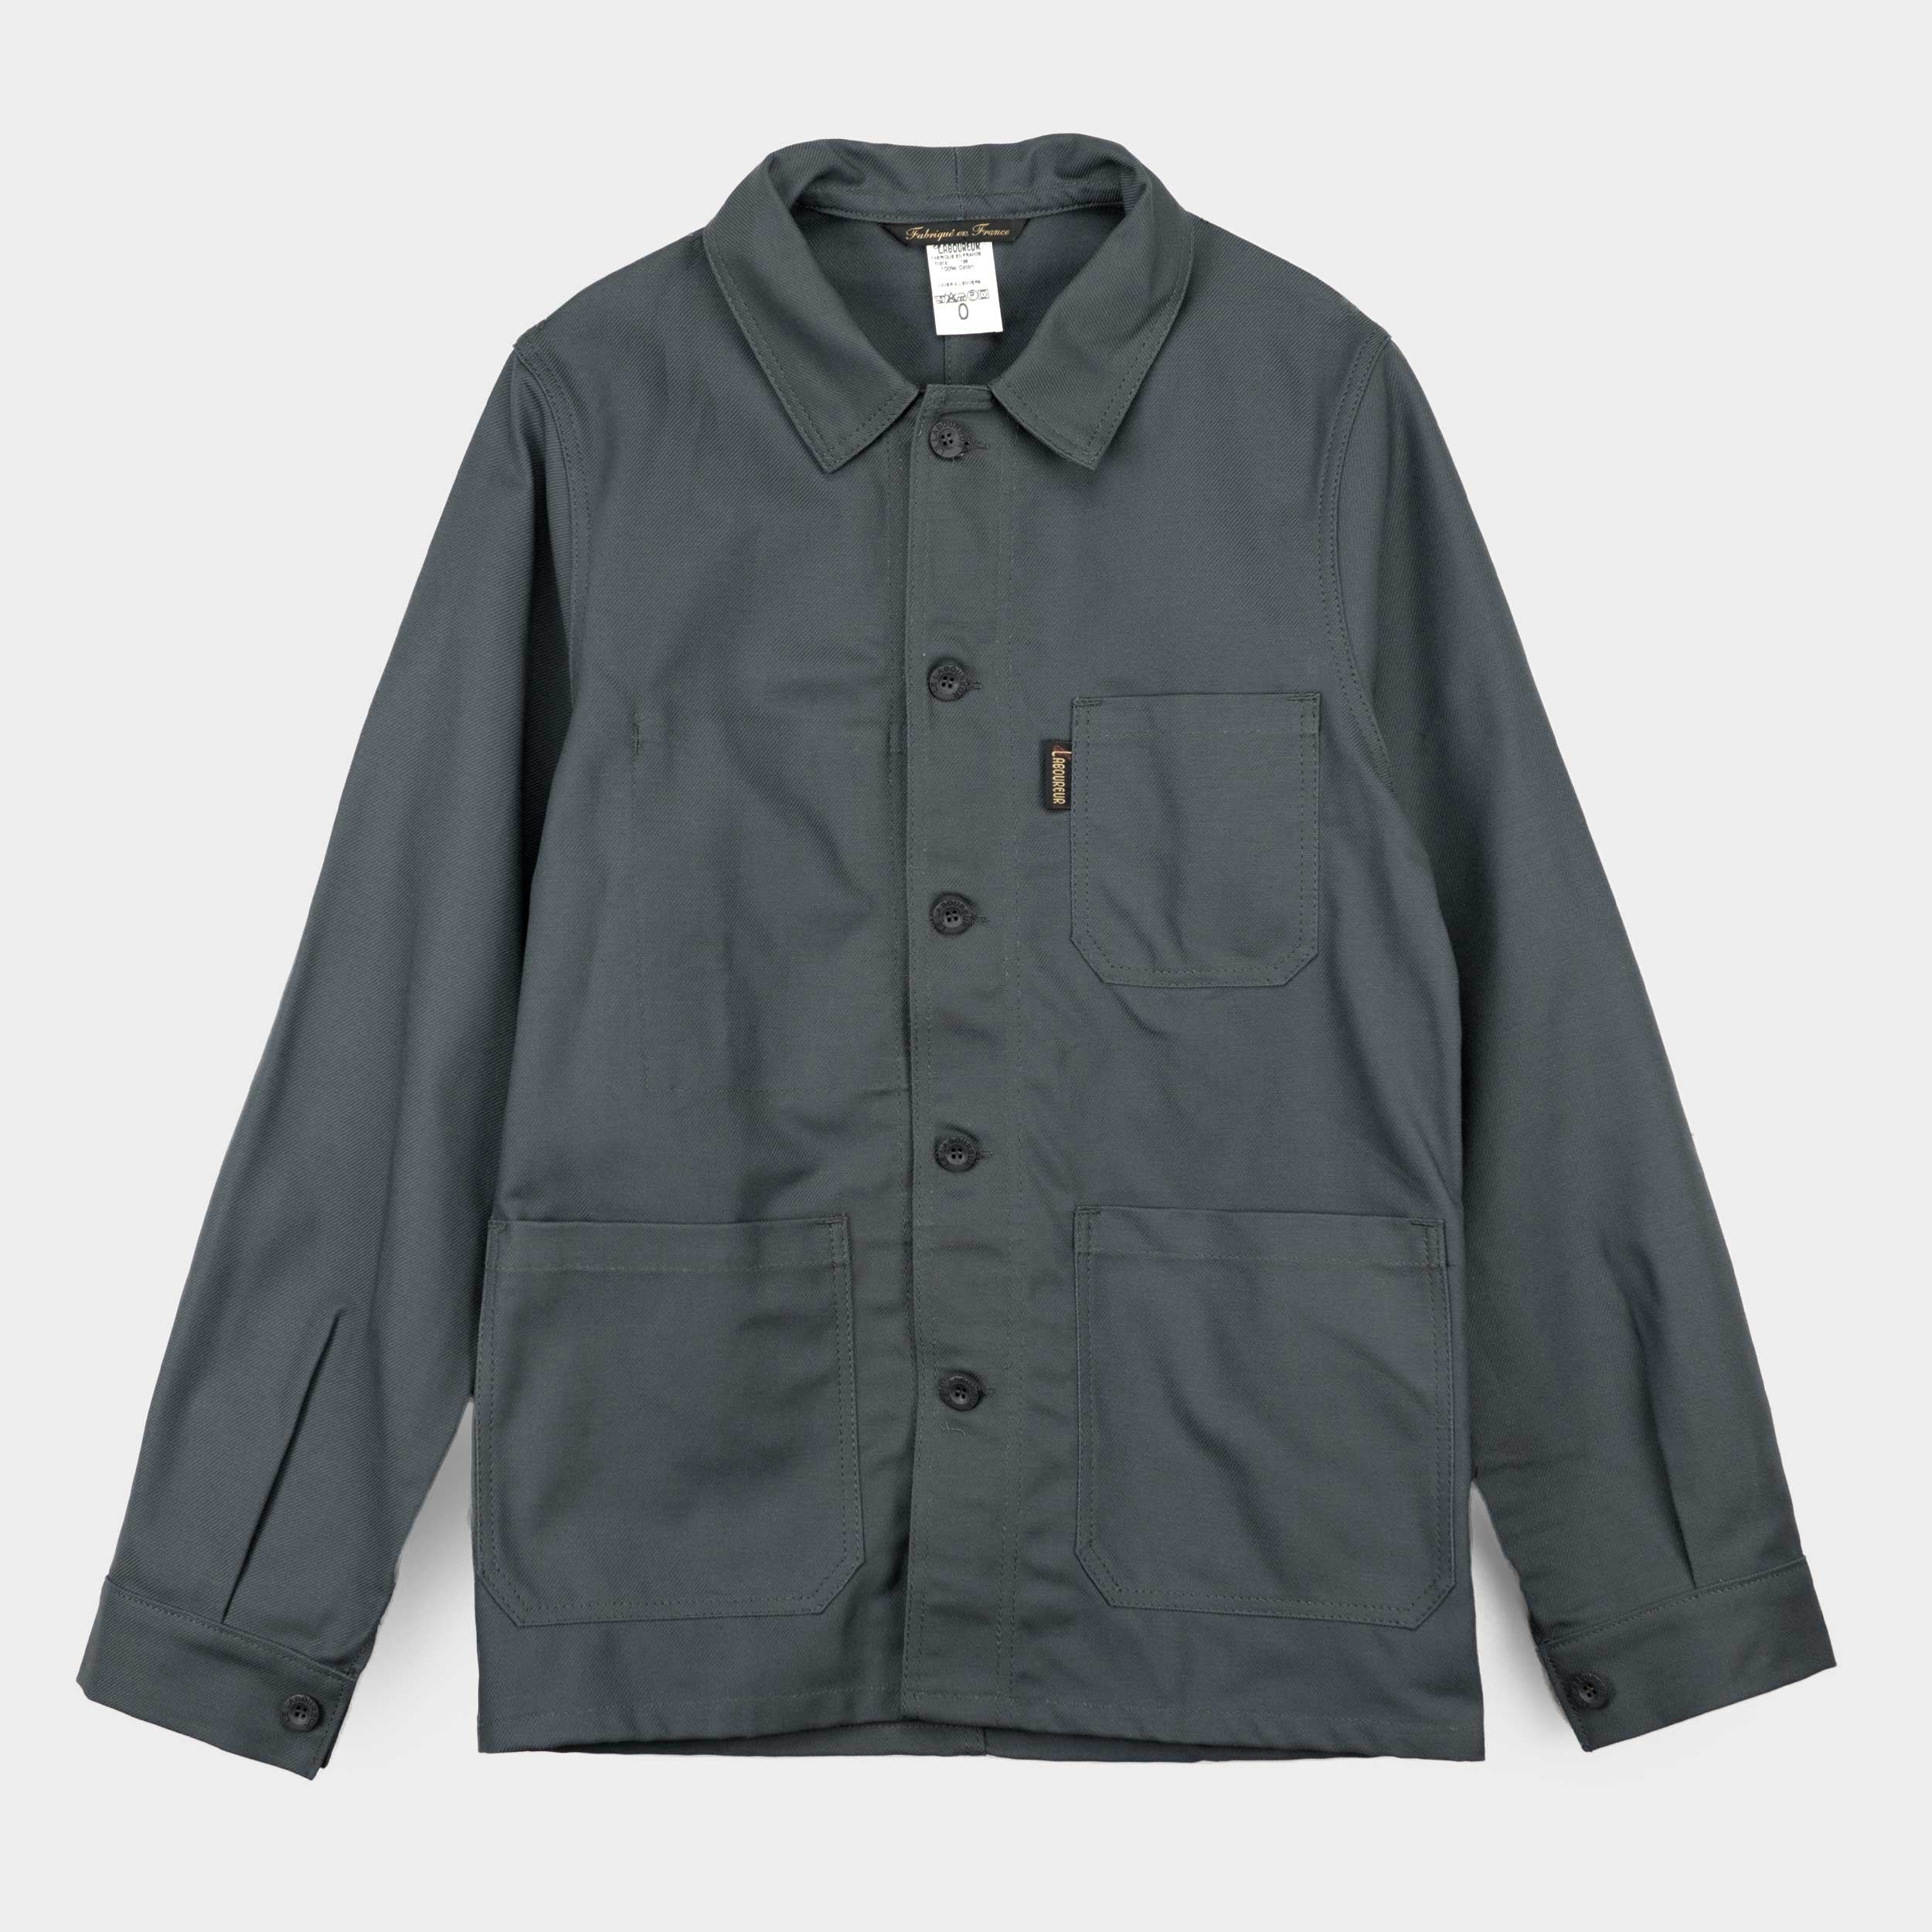 Le Laboureur French Cotton Work Jacket in Grey